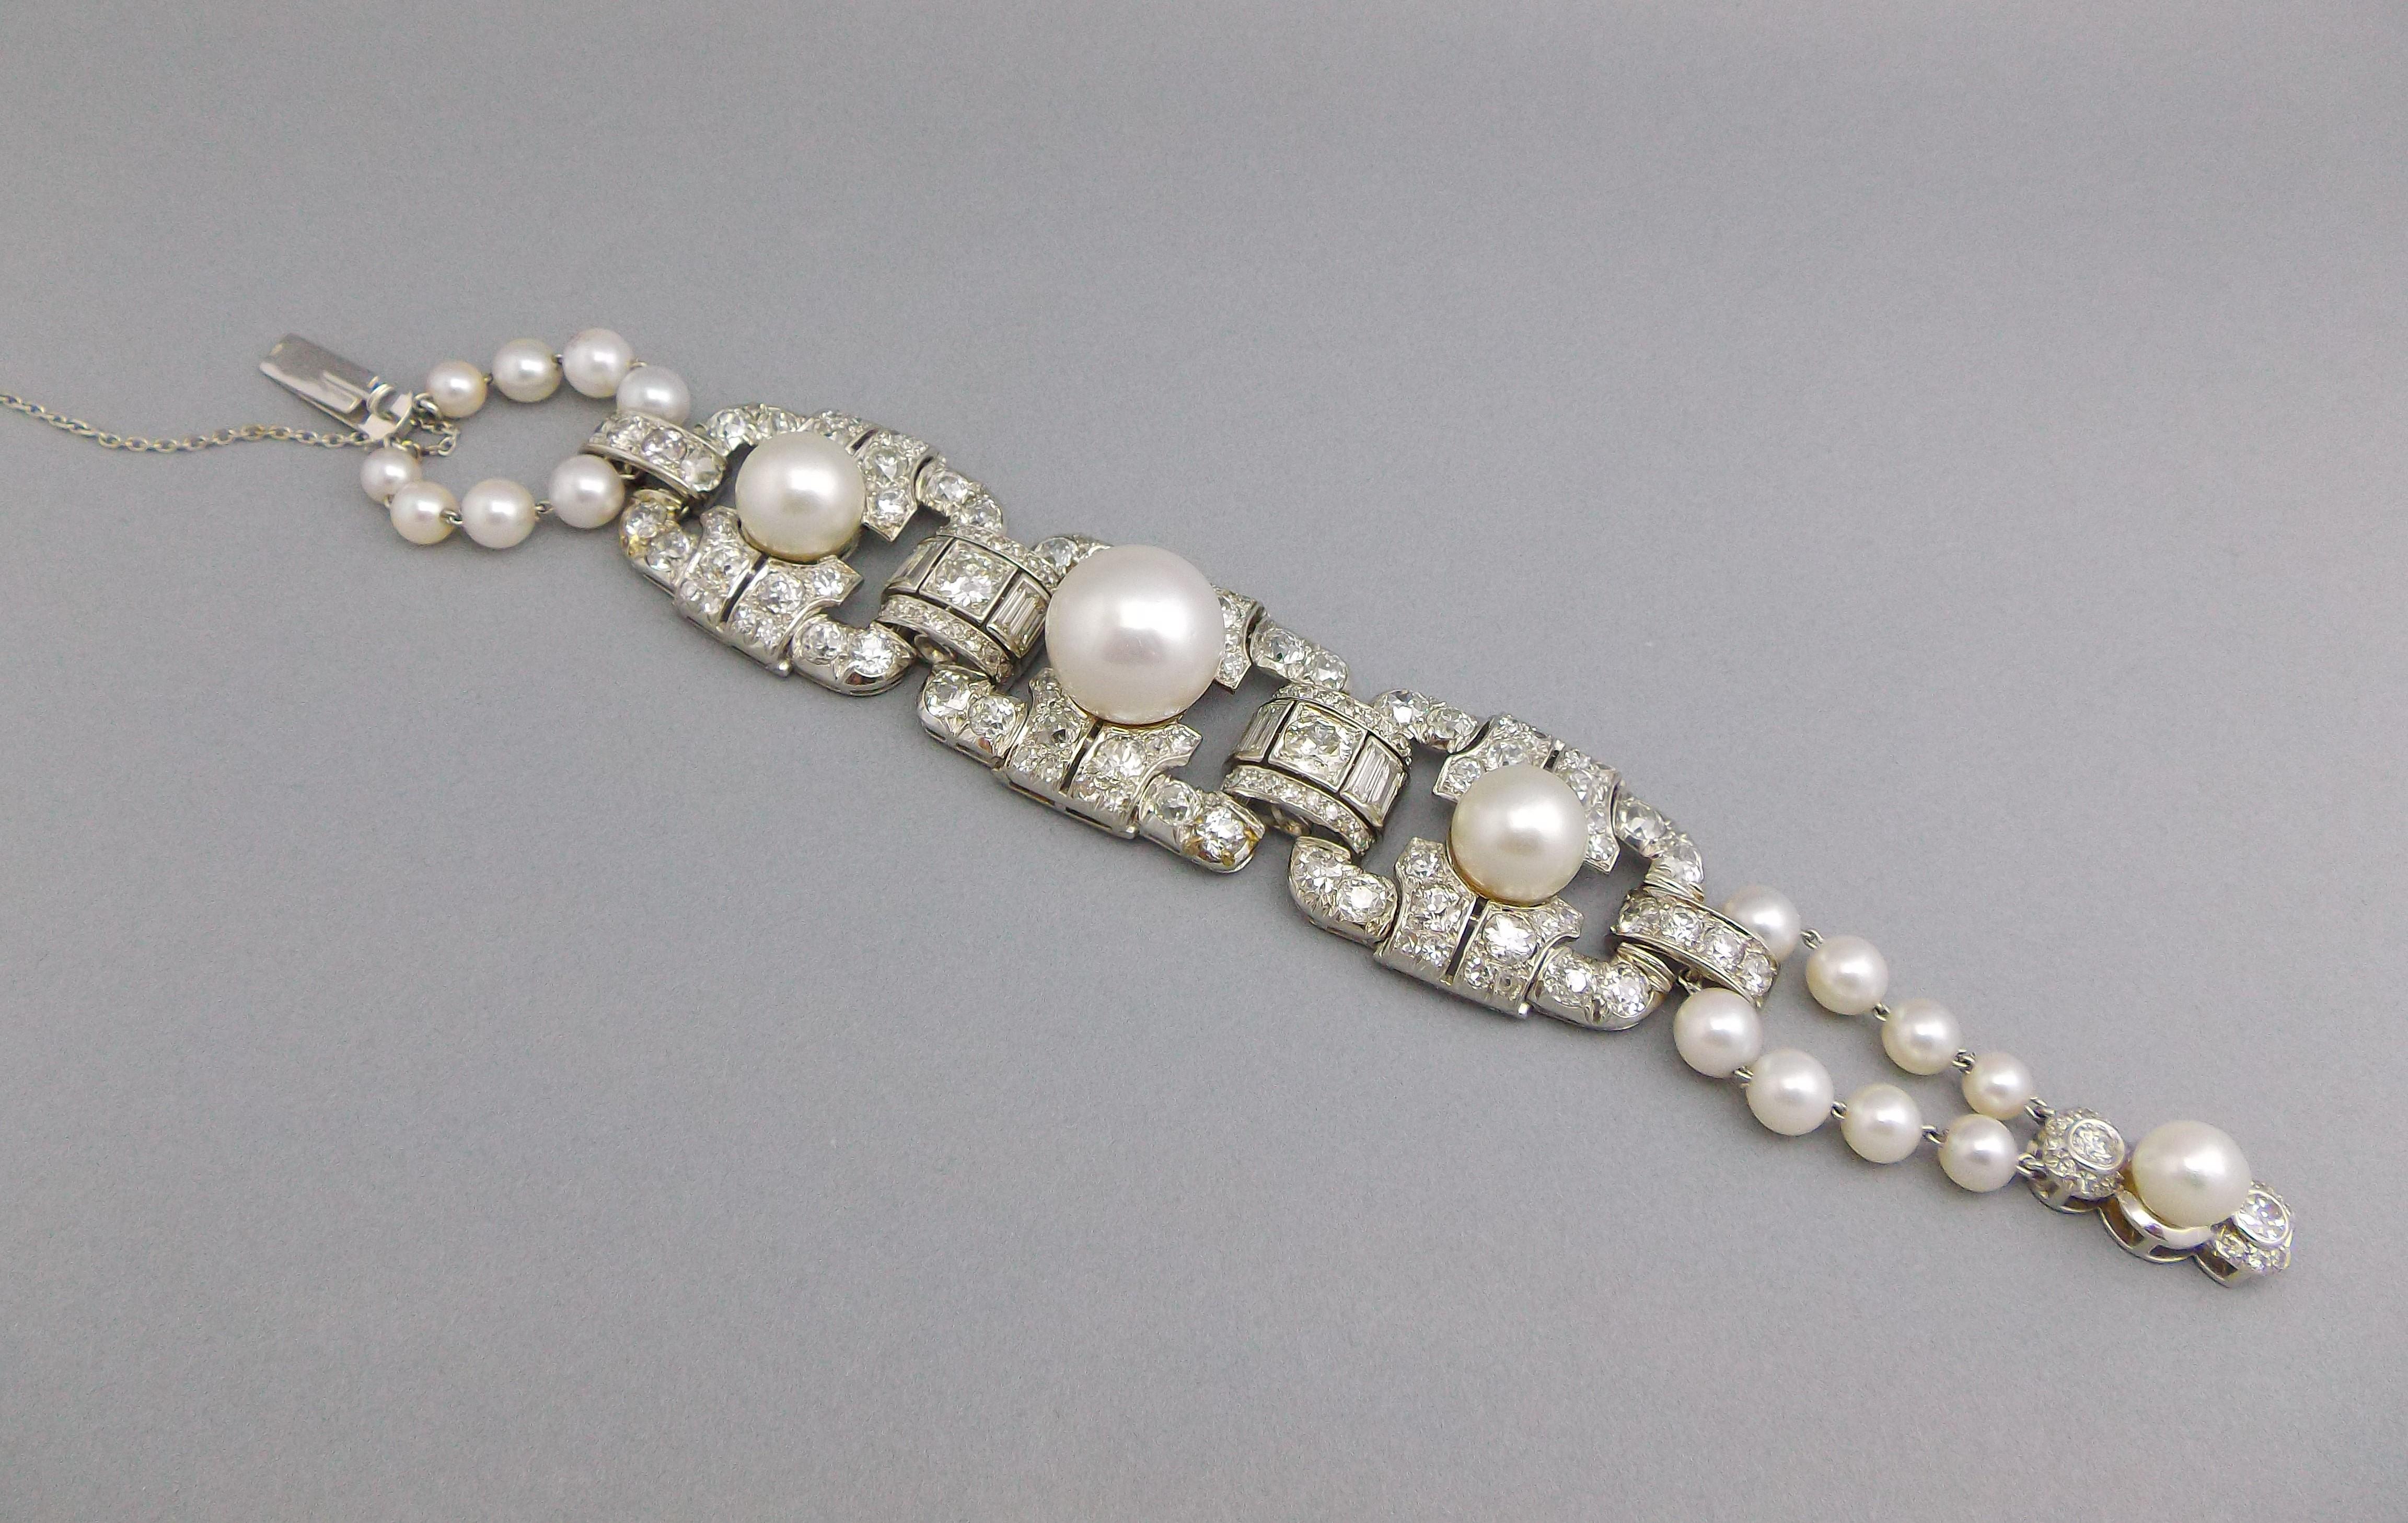 A luxurious vintage pearl and diamond bracelet mount in platinum and 18k white gold. Diamond weight is approximately 10.25ct, length is approximately 6.25 inches, weight is 48.8 grams. 